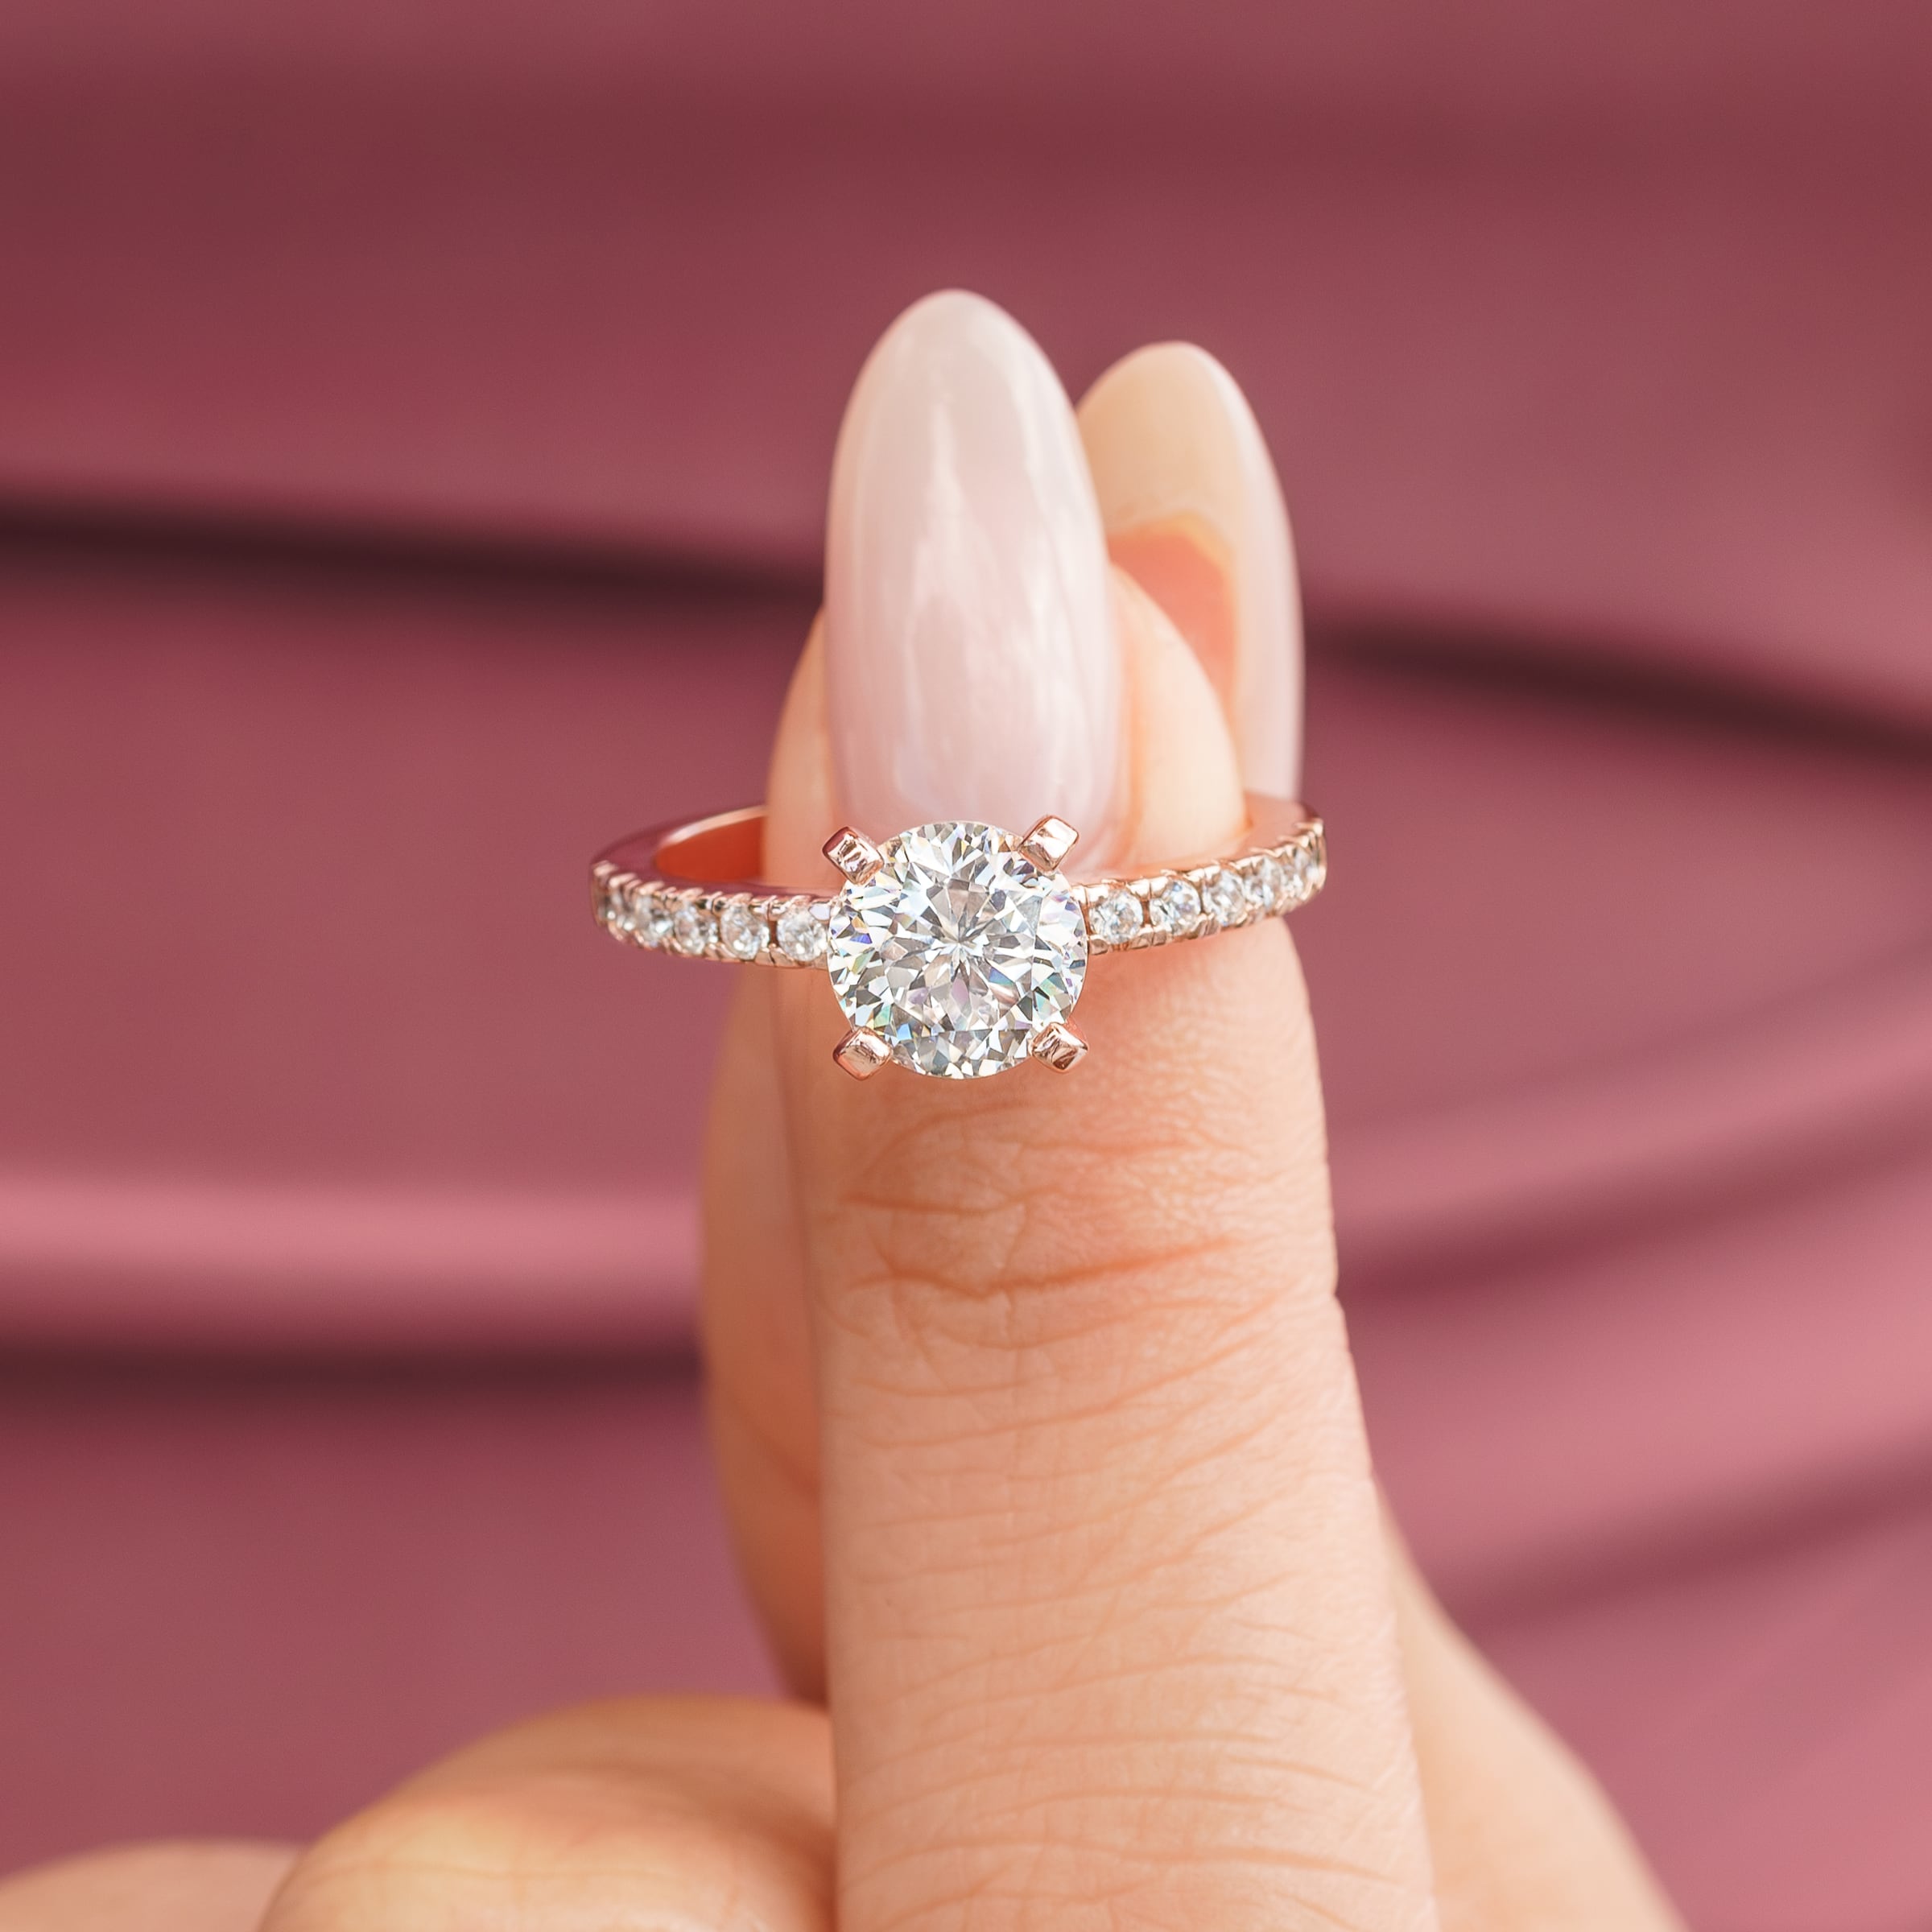 Engagement Ring Vs Wedding Ring - (What's The Difference?)